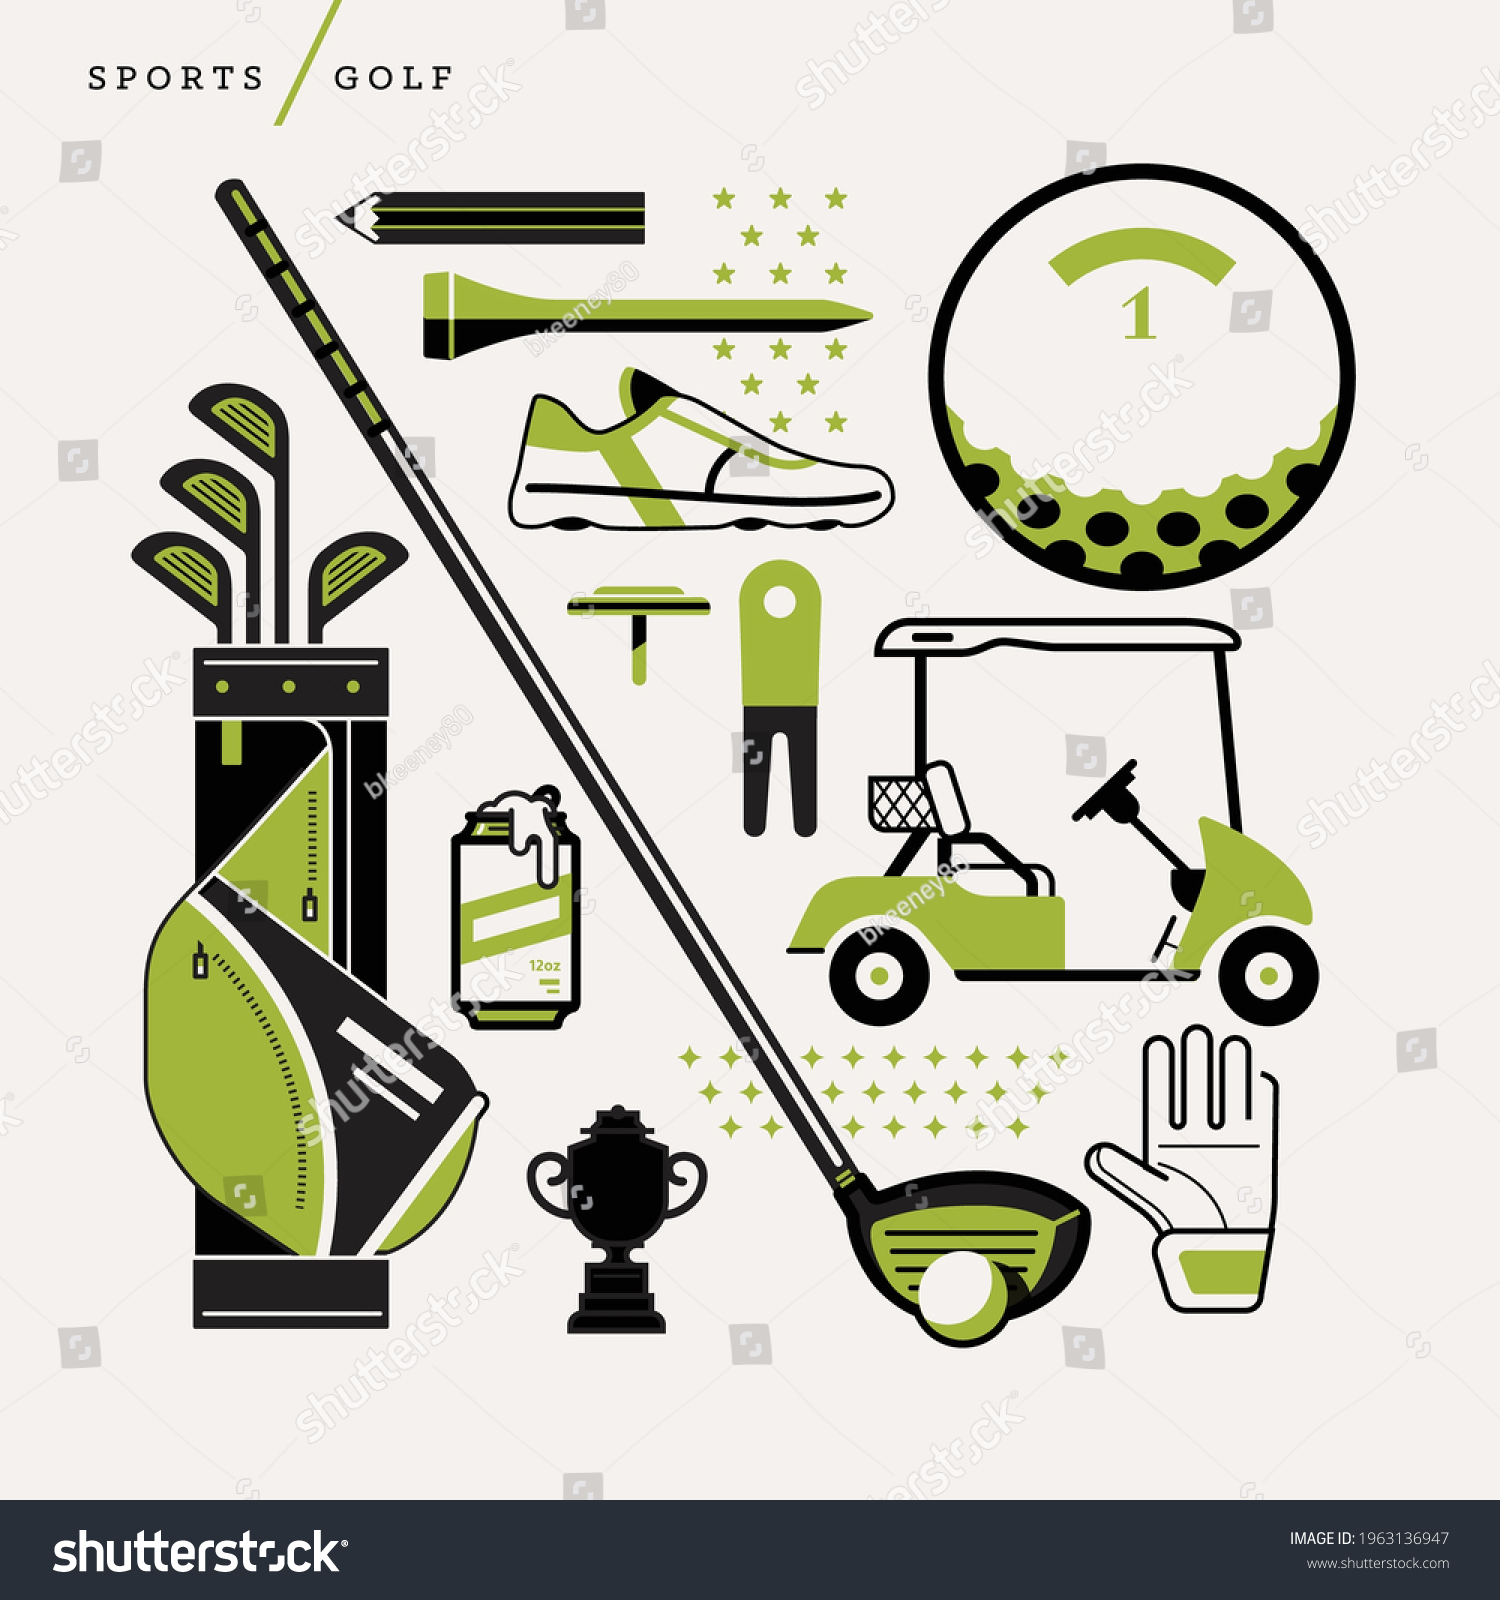 SVG of Creative abstract vector art illustration of golf. Geometric shapes compiled modern concept. Template sports golf bag club ball cart trophy glove tee pencil golfer cleats marker drink pro svg